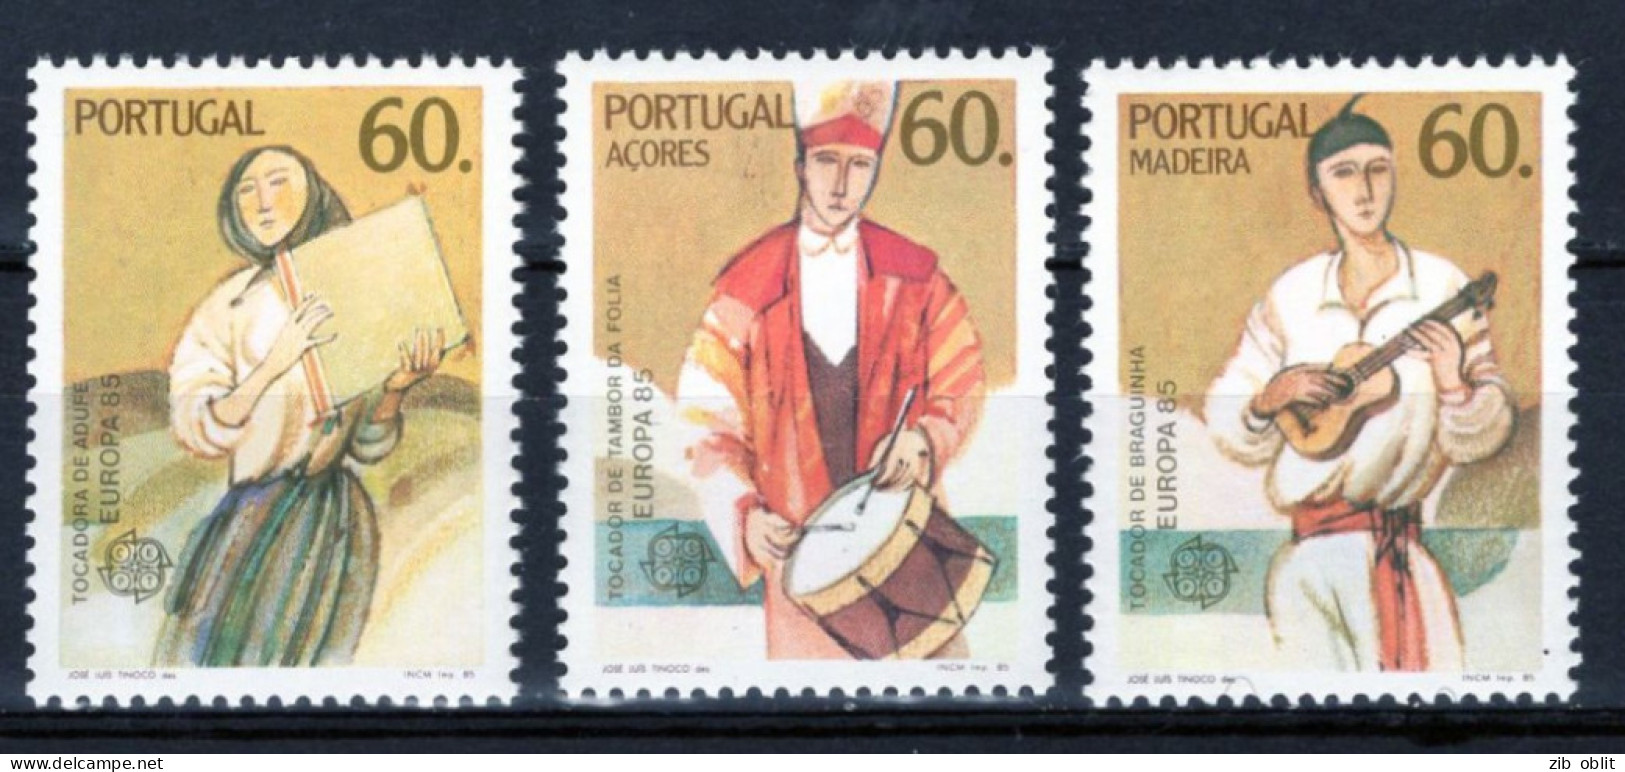 (alm10) EUROPA CEPT  Xx MNH  PORTUGAL ACORES MADERE MADEIRA Music Musique Tambour Guitare Tambourin - Music